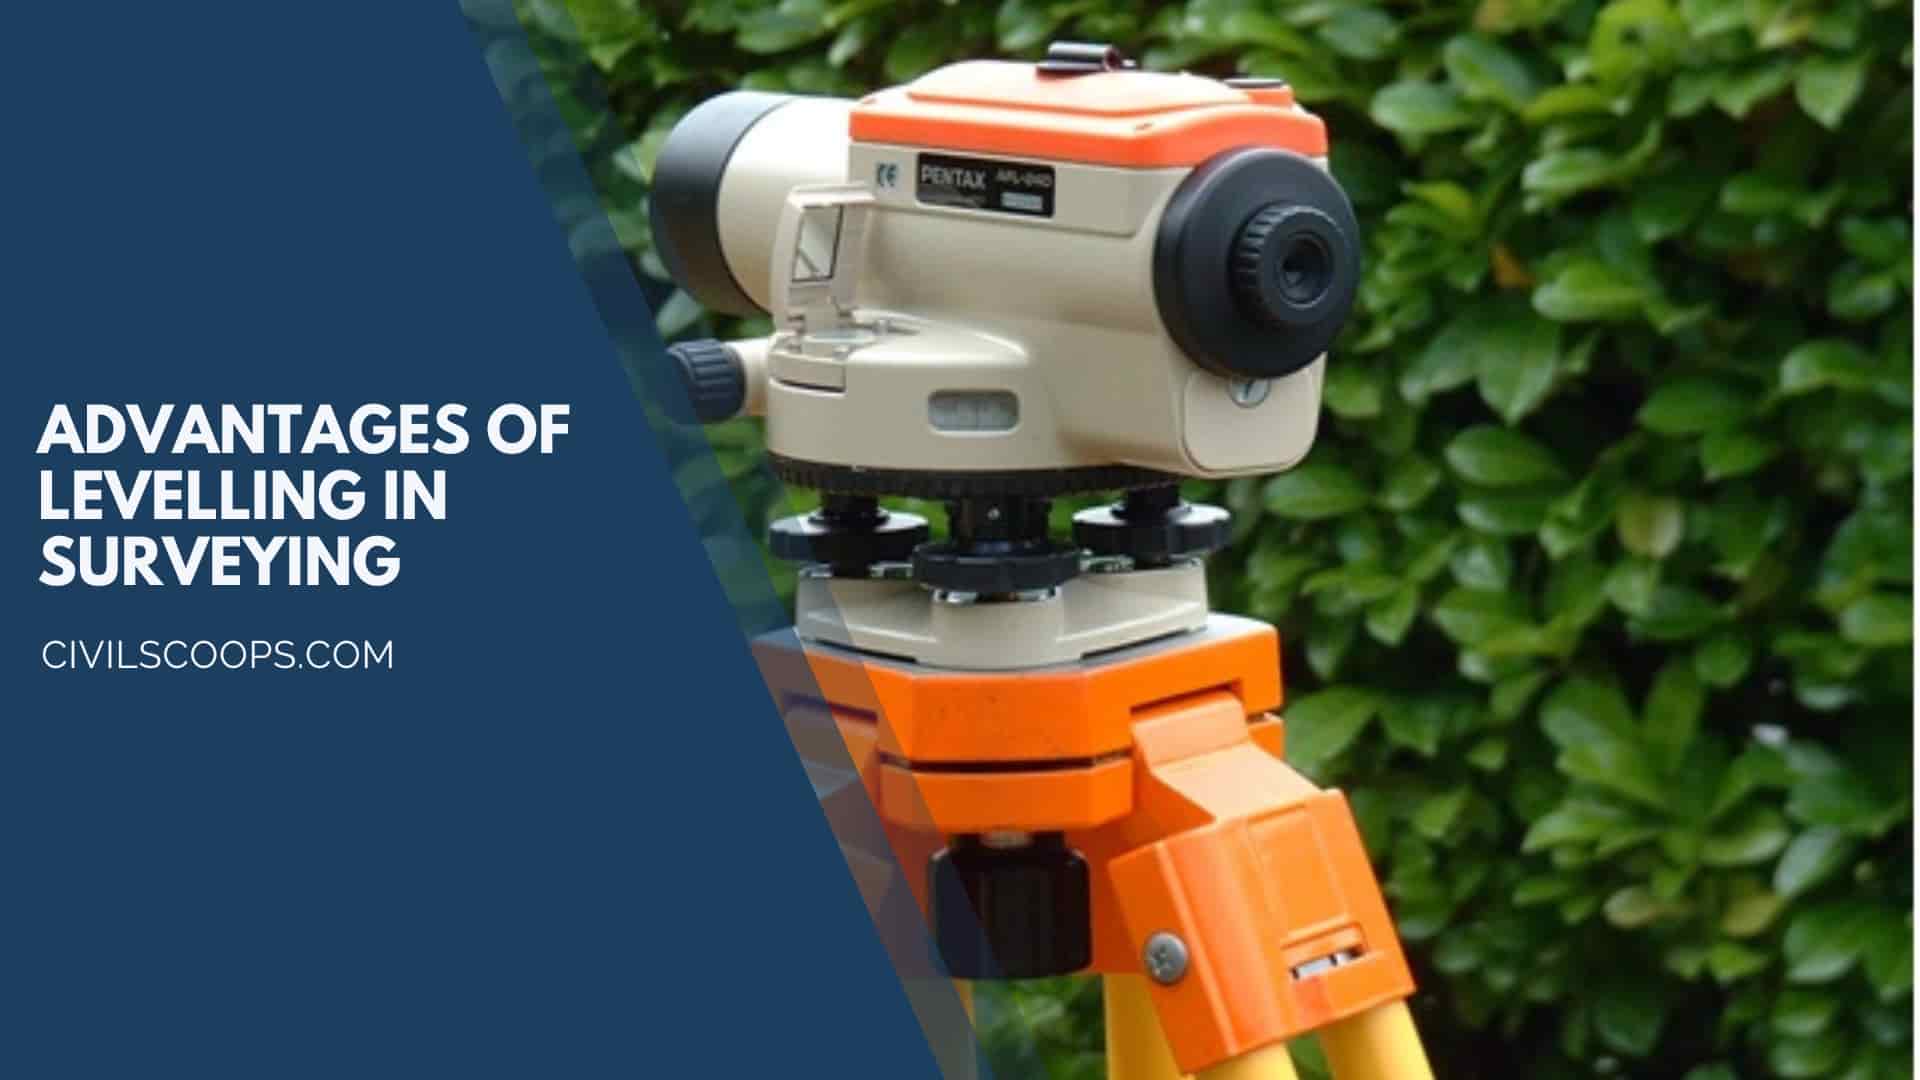 Advantages of Levelling in Surveying